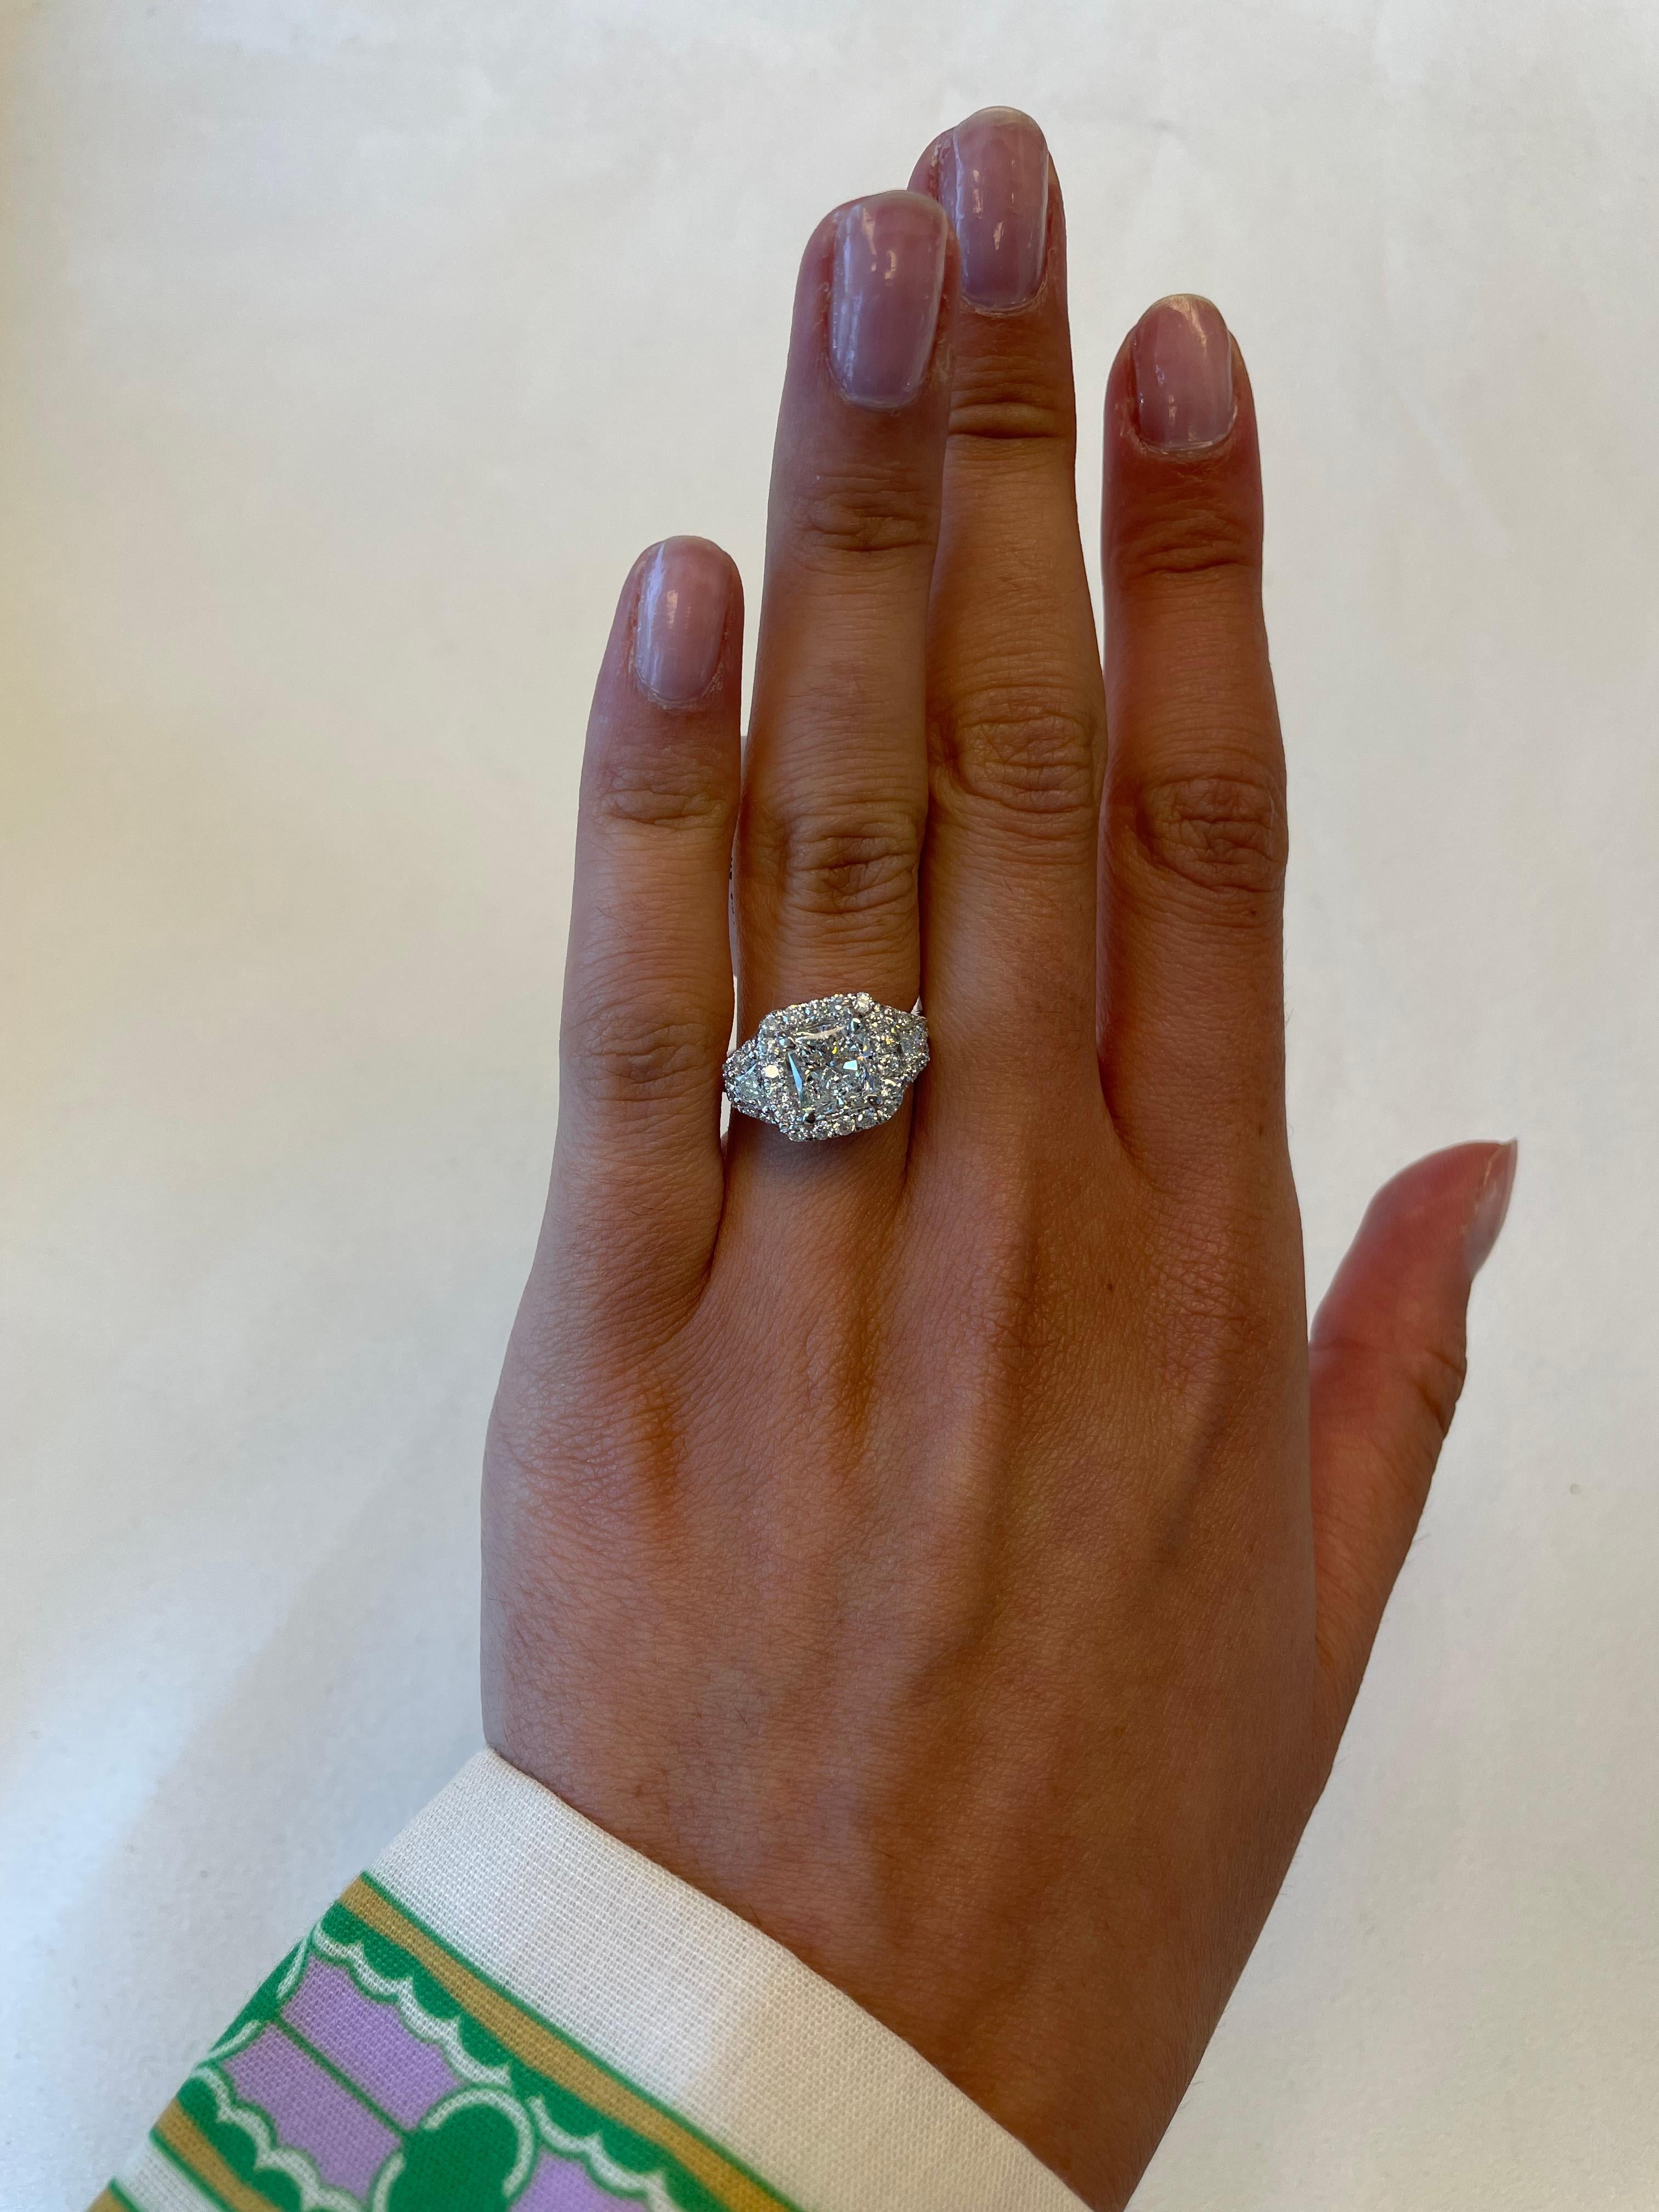 Stunning diamond three-stone engagement ring with halo, GIA certified. By Alexander Beverly Hills.
3.06 carats total diamond weight.
2.00 carat radiant cut diamond, GIA certified. G color grade and VS1 clarity. Complimented by 2 trapezoids and 54